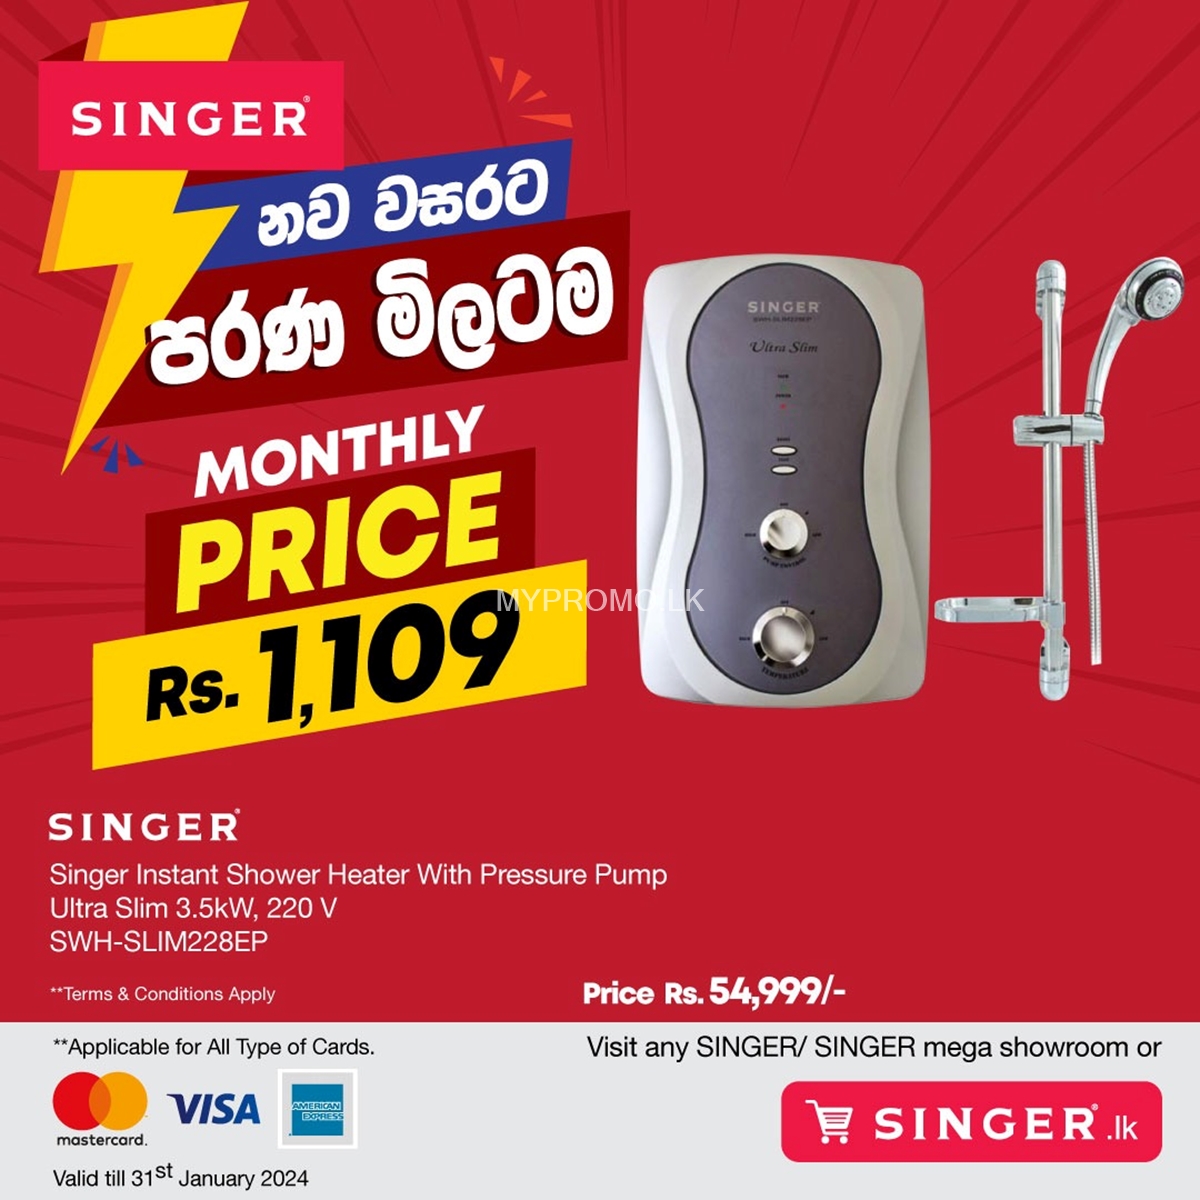 New Year's new Water Filter and Water Heaters models from SINGER at the lowest price